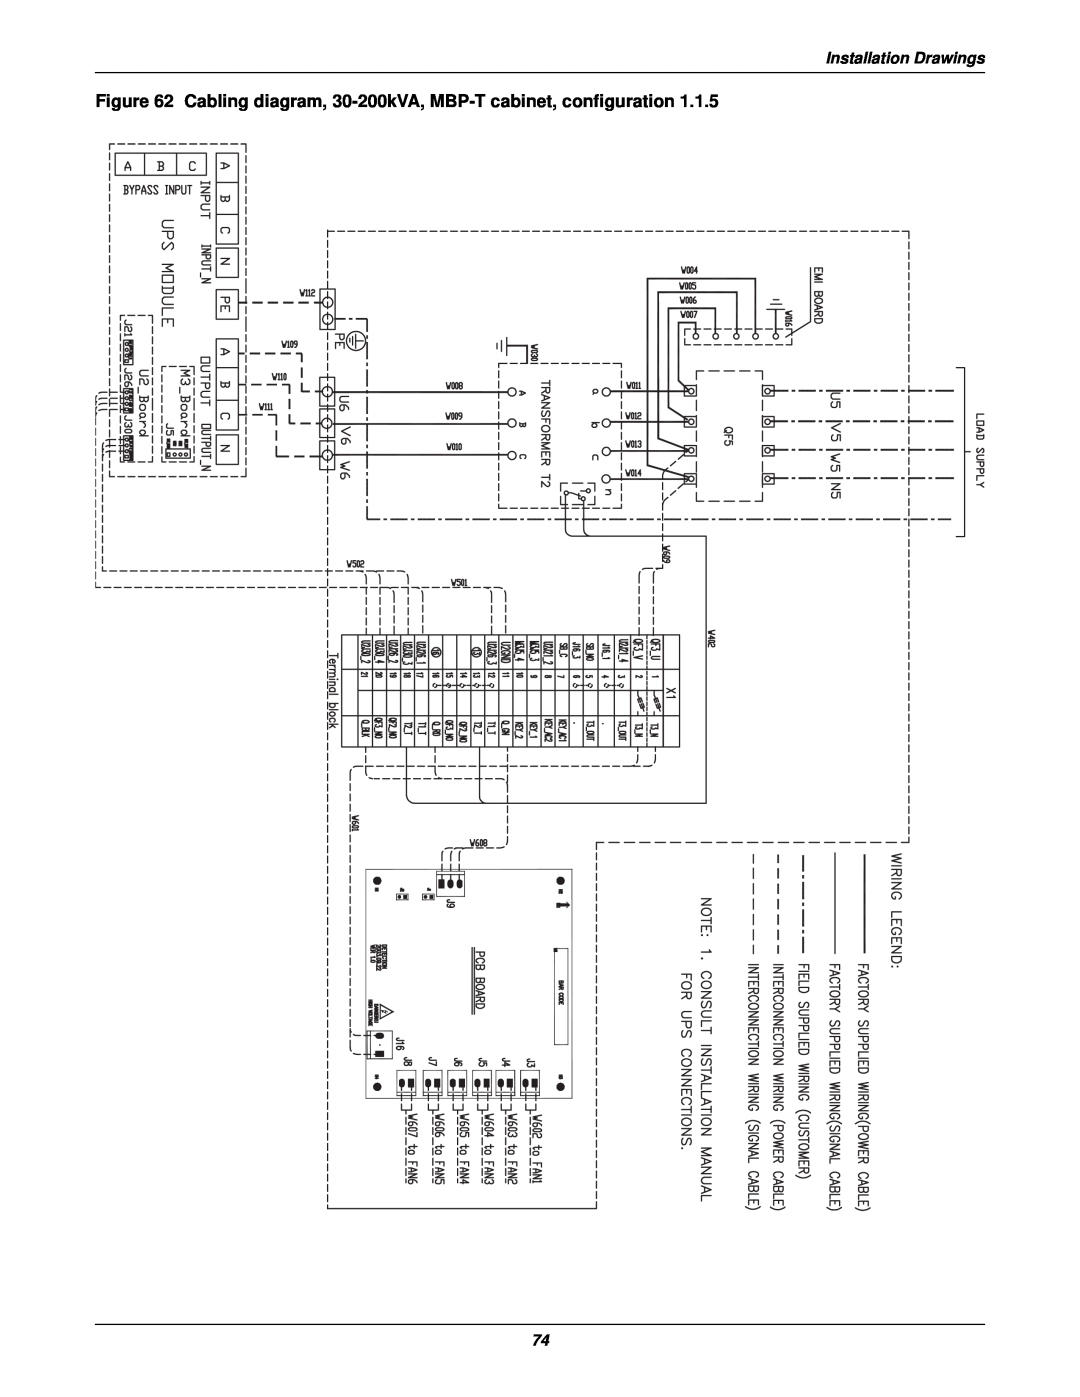 Emerson 50 and 60 Hz, 400V user manual Cabling diagram, 30-200kVA, MBP-T cabinet, configuration, Installation Drawings 